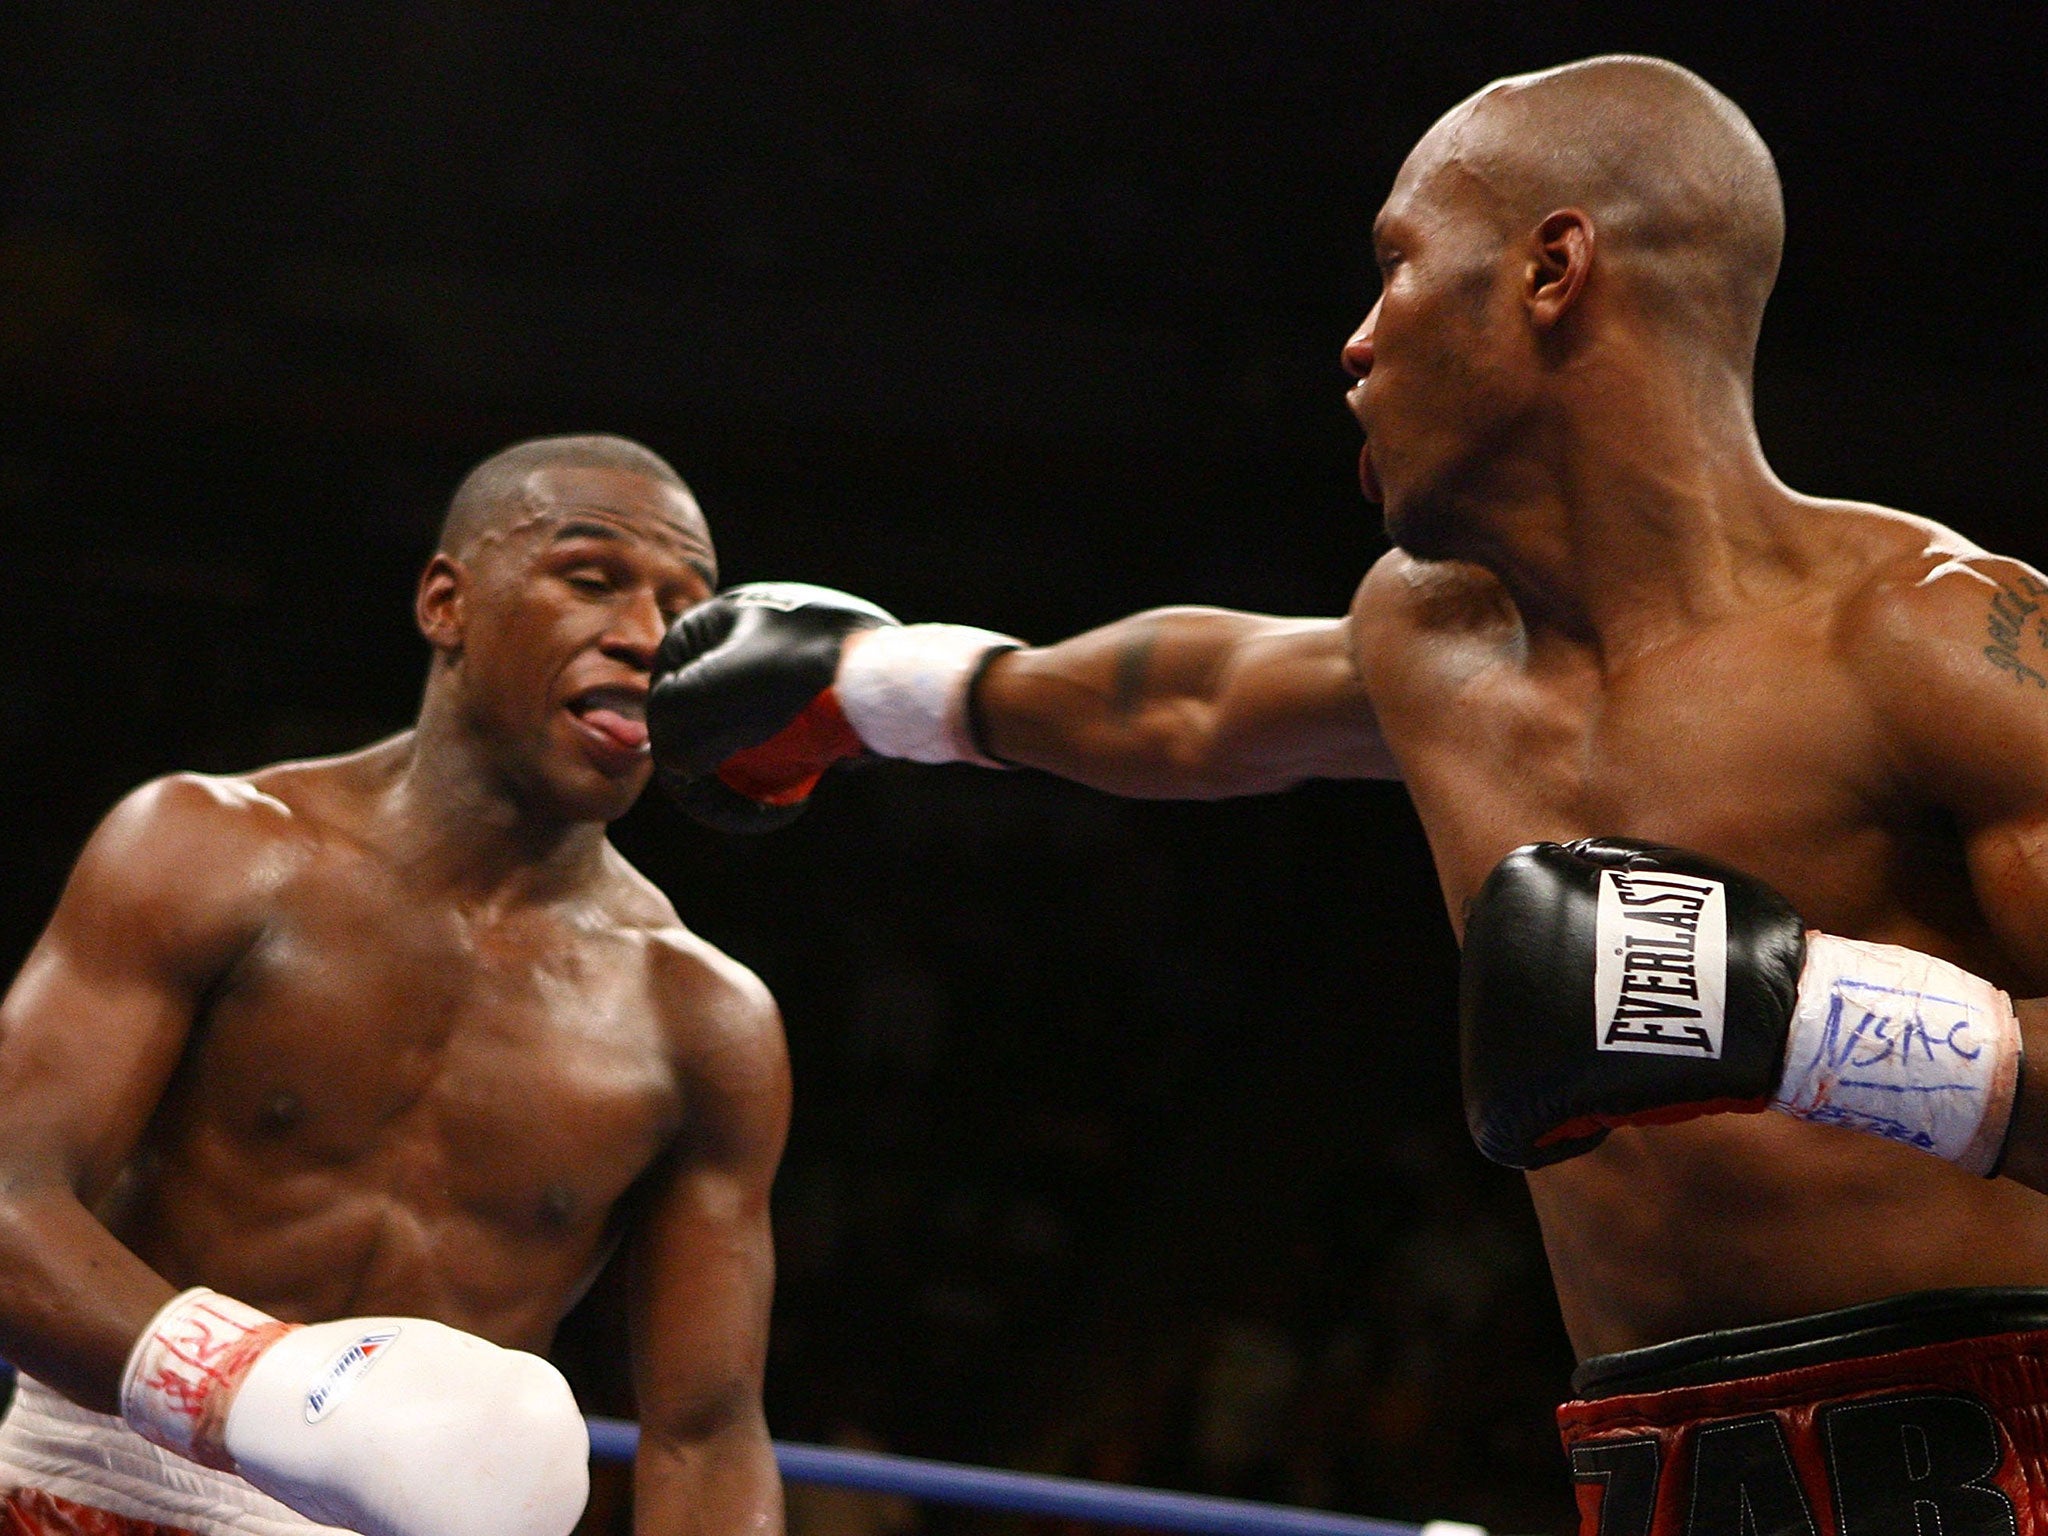 Zab Judah (right) hits Mayweather during their fight in 2006